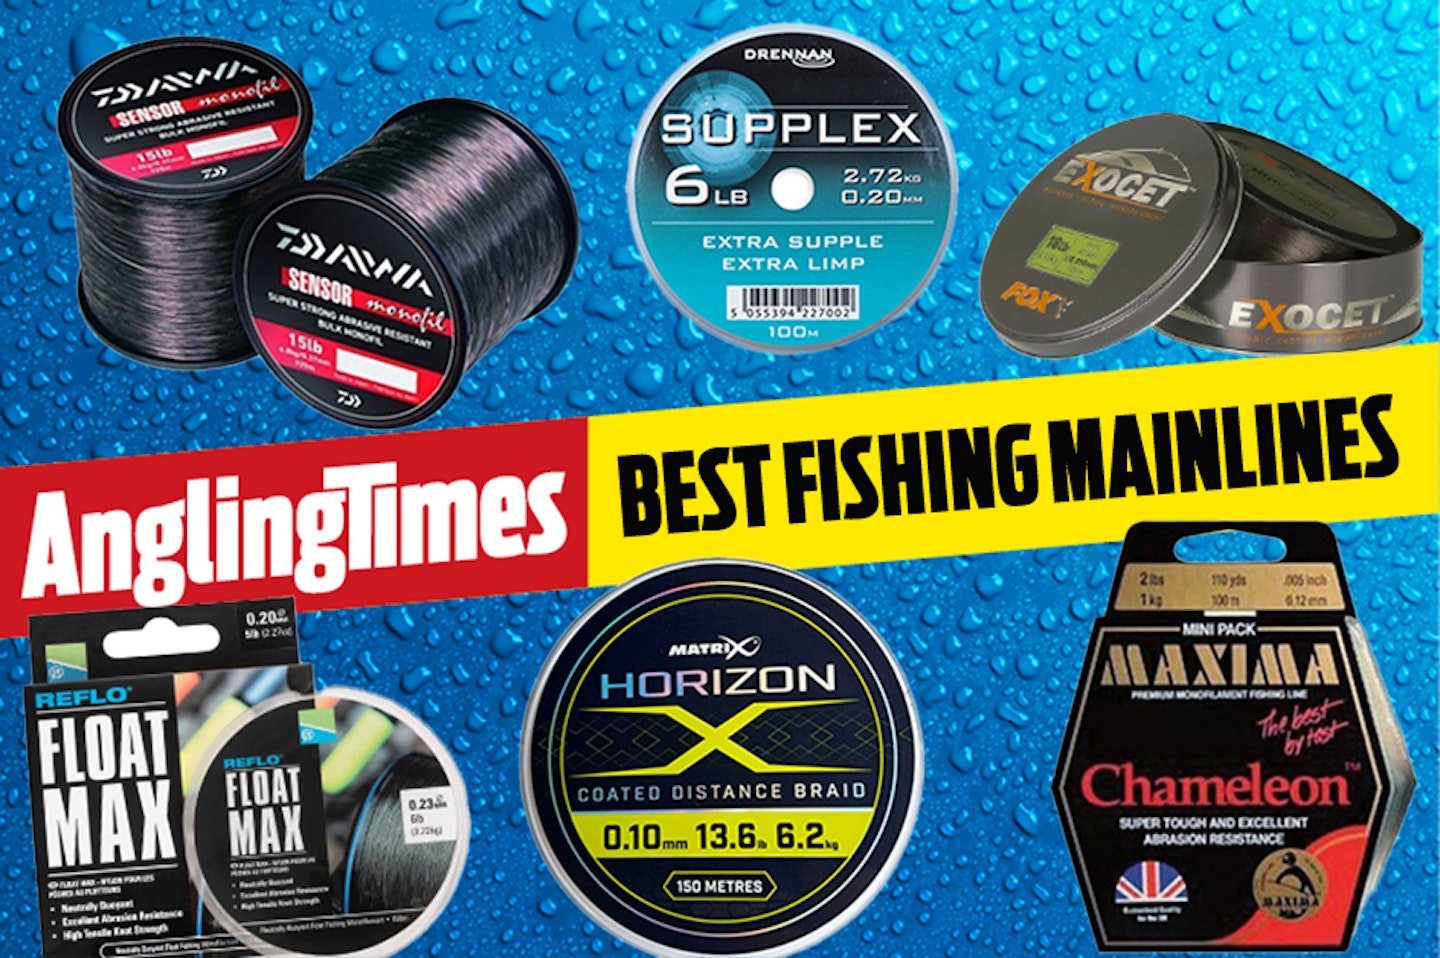 Fishing lines - Pros and cons of braided lines - The Fishing Website